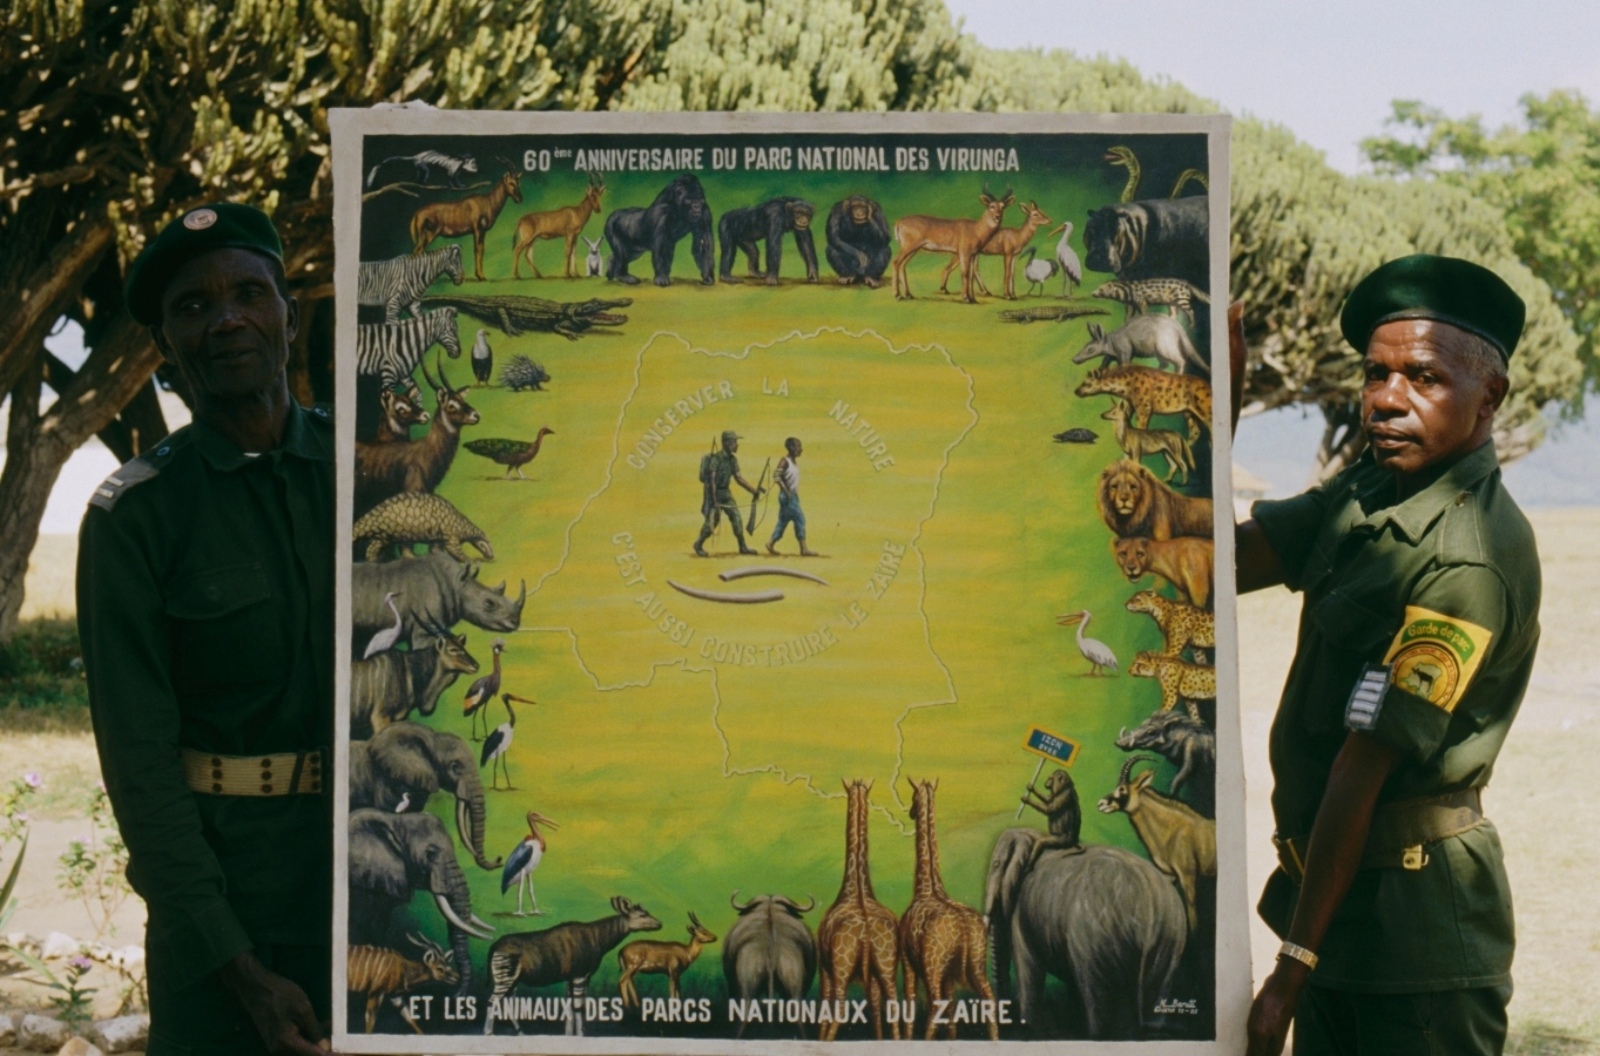 Two guards for Virunga National Park in the Democratic Republic of Congo hold up a poster commemorating the 60th anniversary of the park.